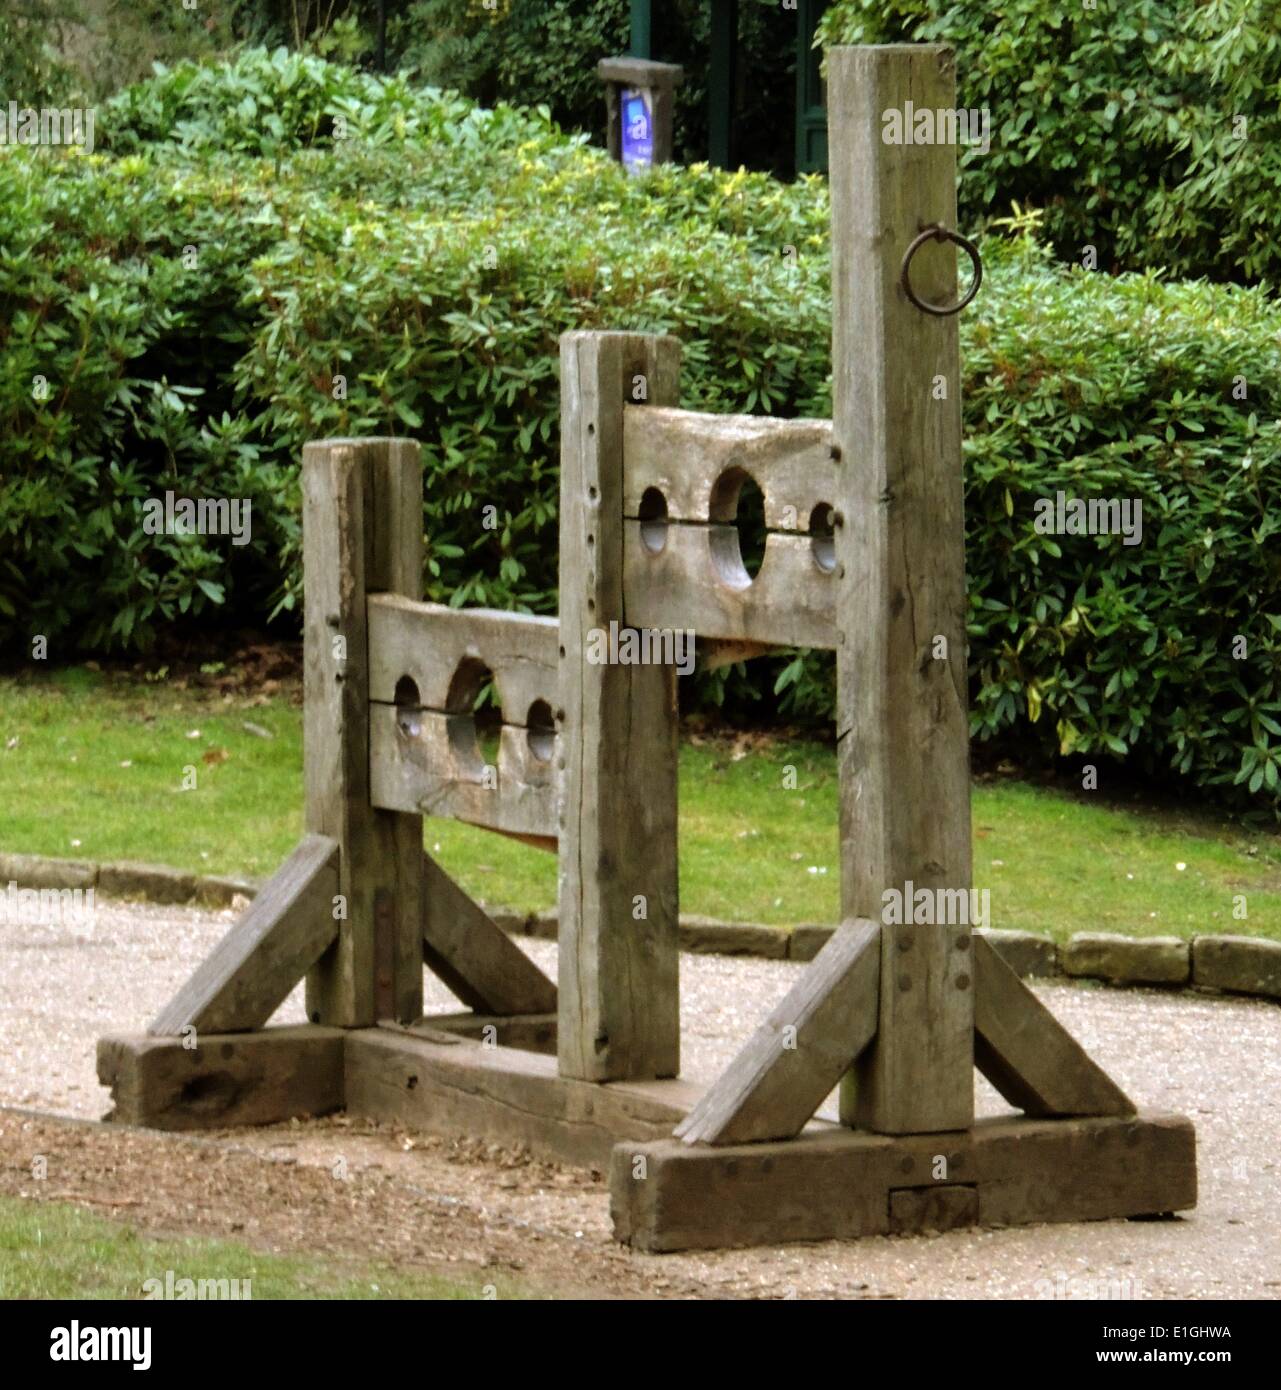 17th century wooden stocks or pillary.  Used to hold criminals while they were rebuked in public.  Warwick Castle, England. Stock Photo